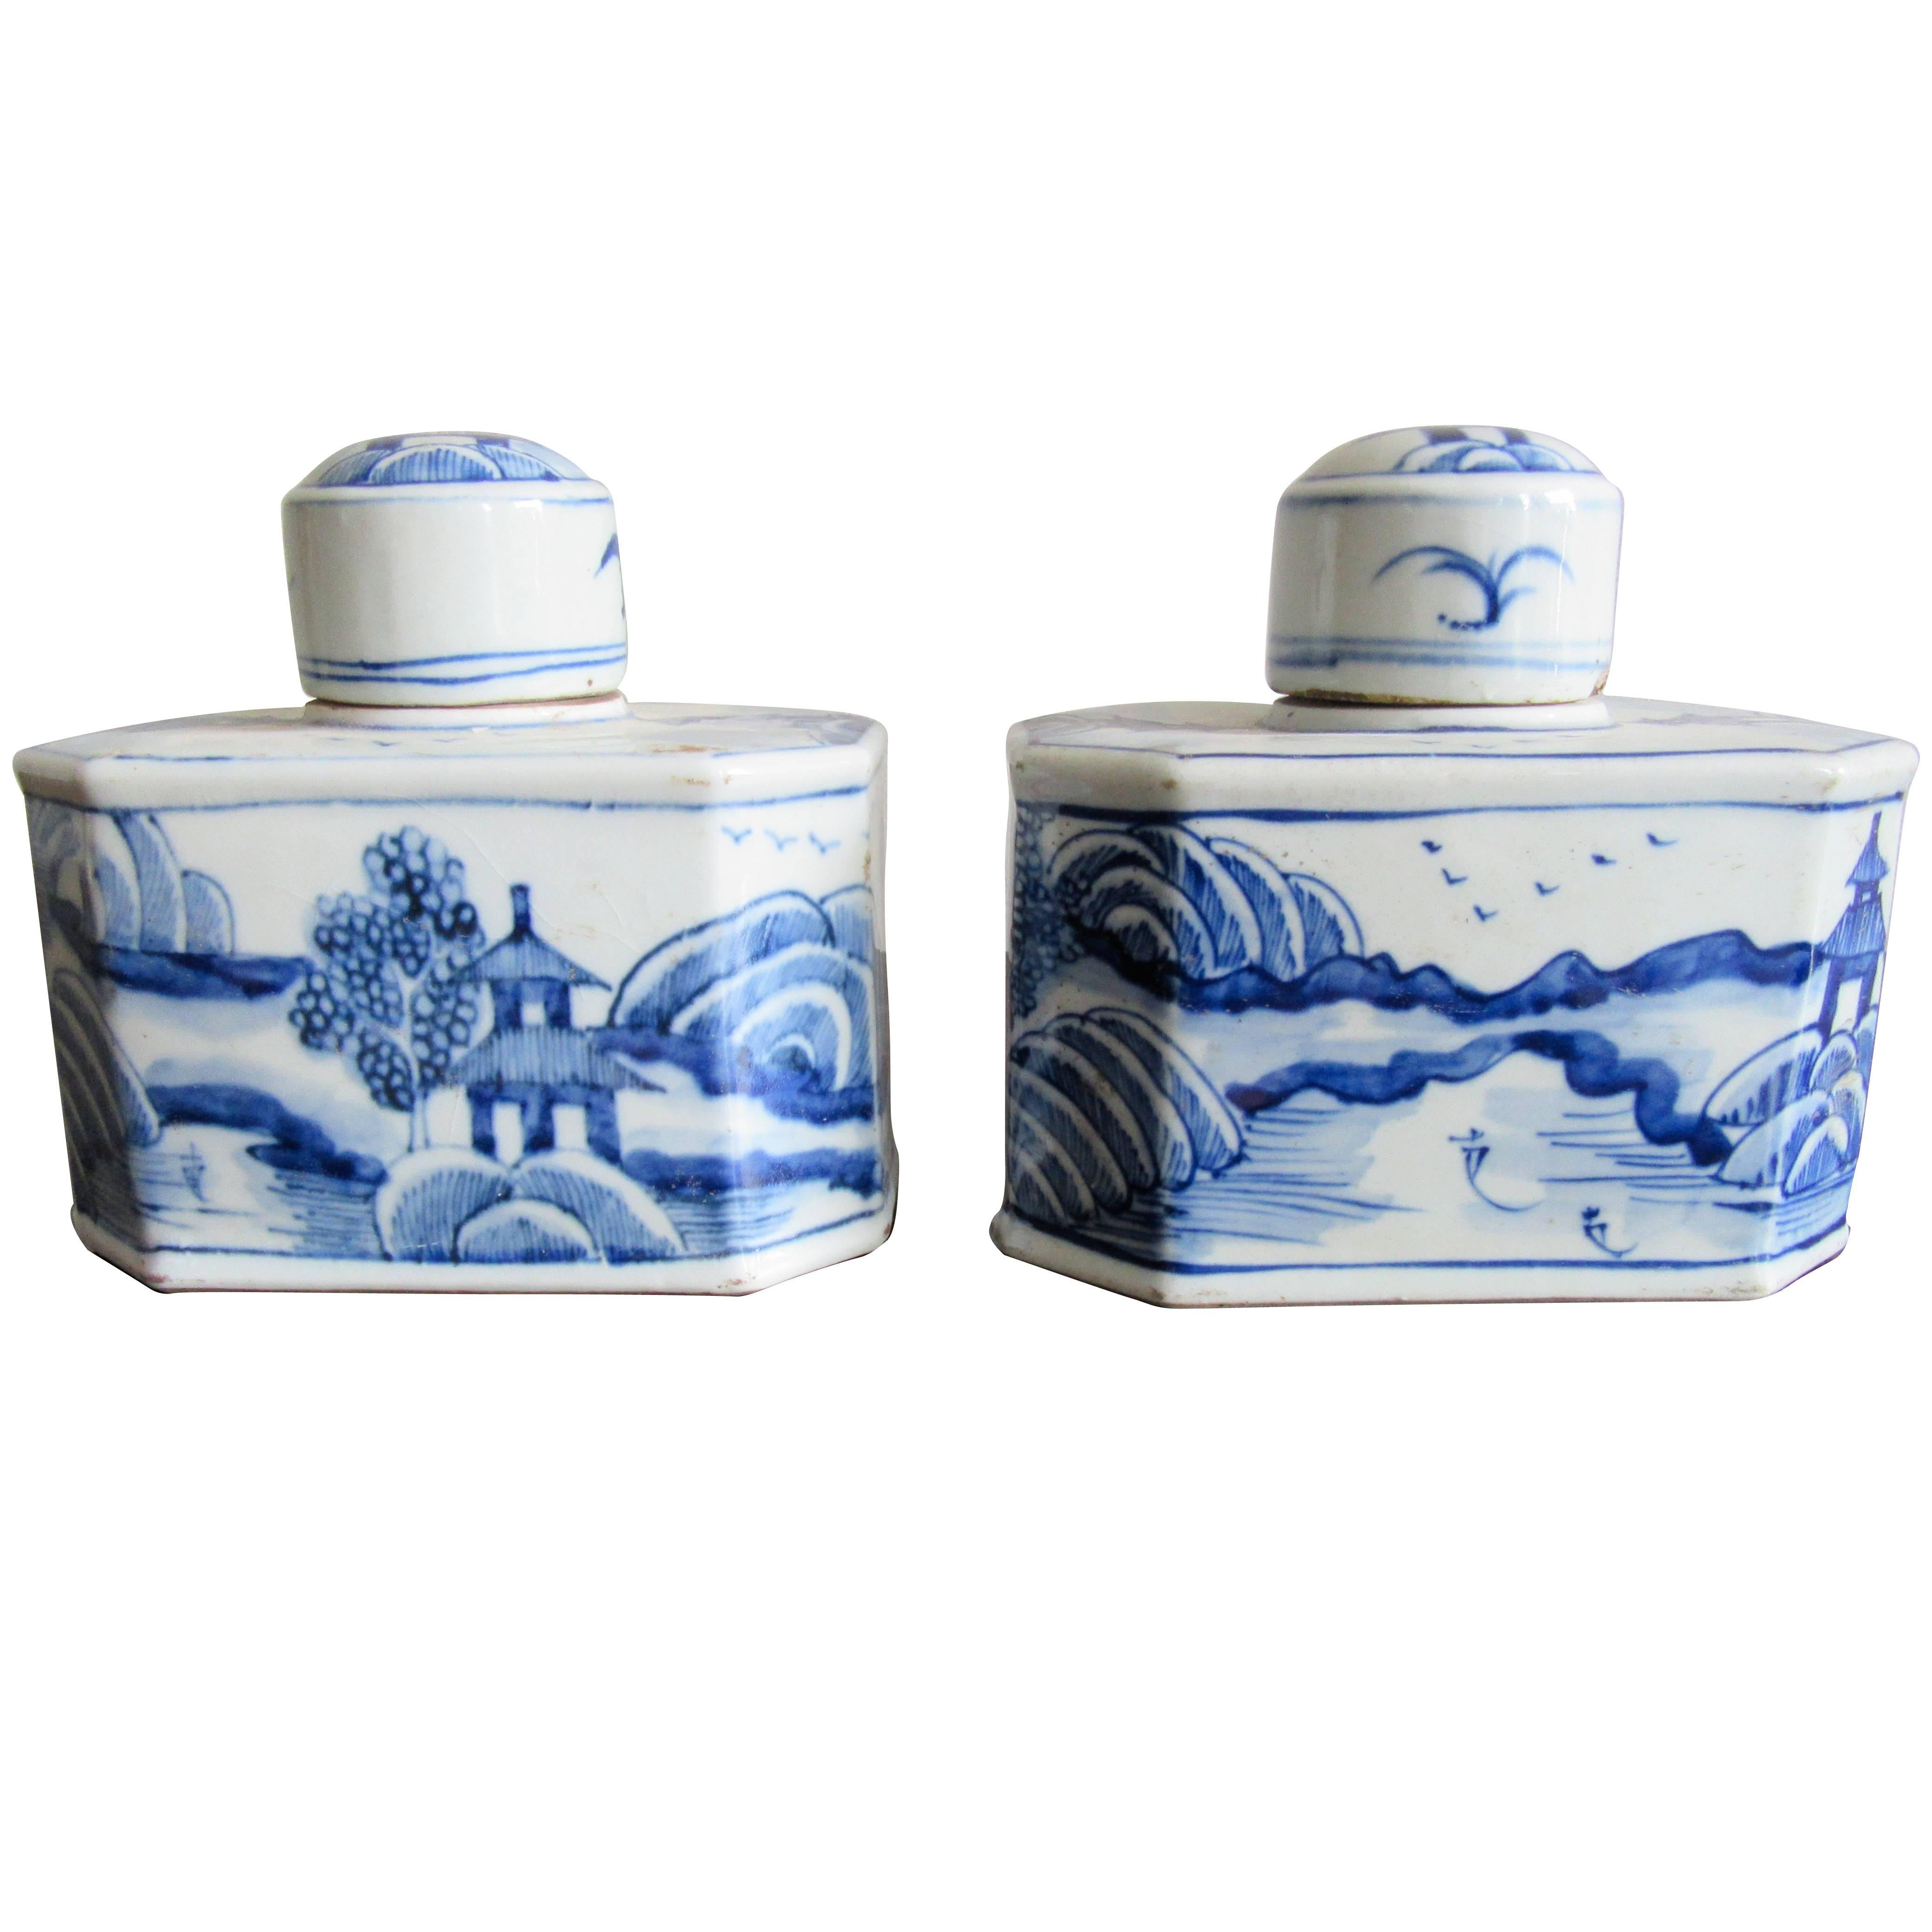 Small Pair of Chinese Blue and White Porcelain Tea Canisters